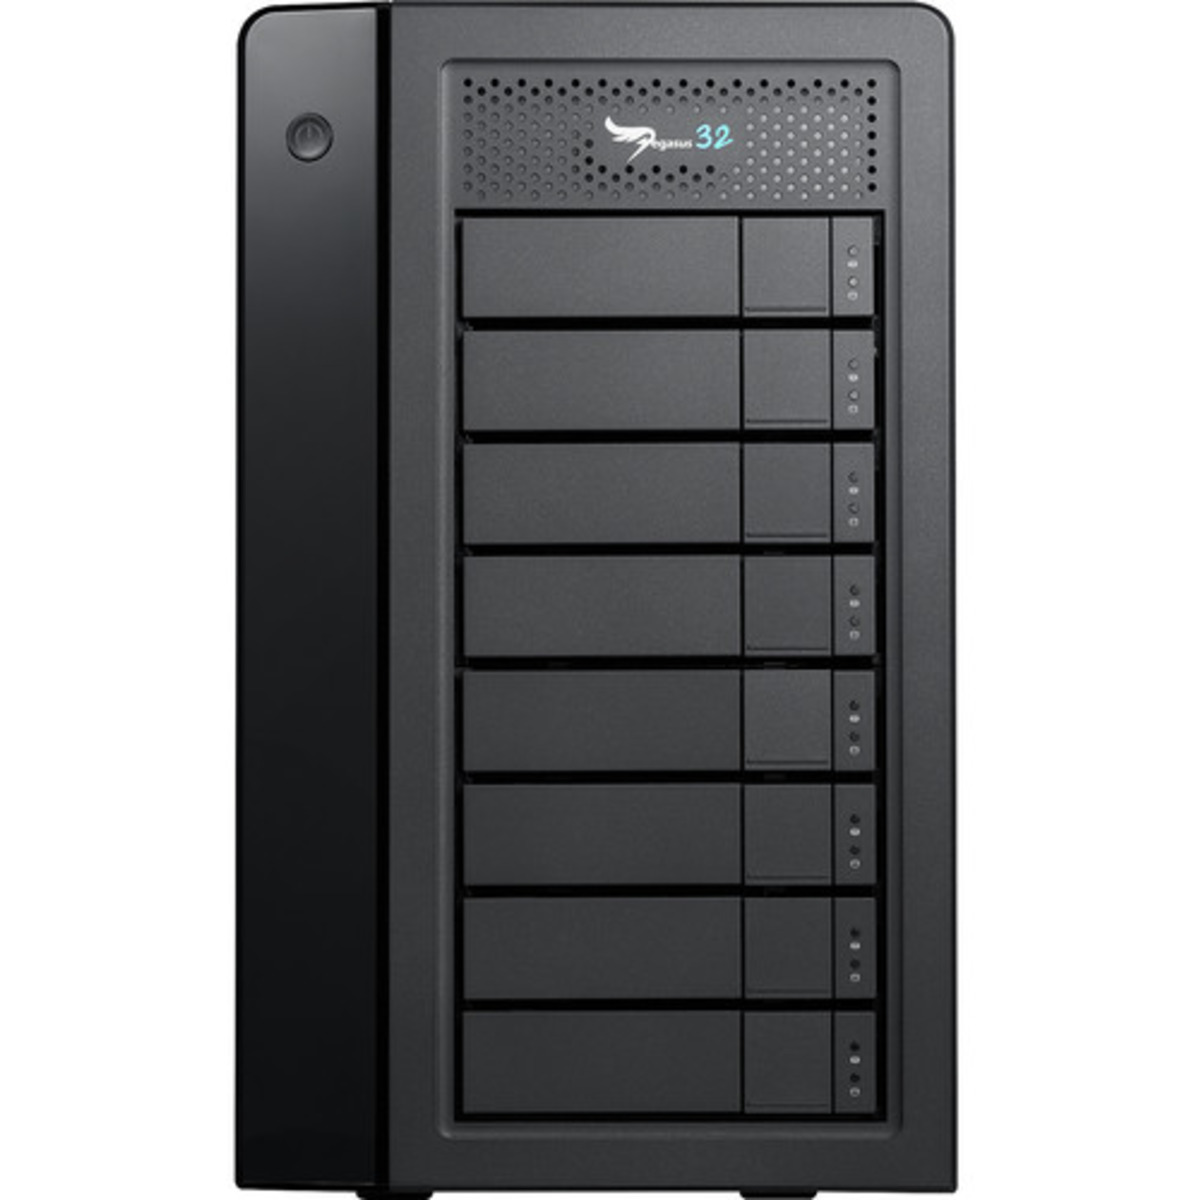 Promise Technology Pegasus32 R8 Thunderbolt 3 32tb 8-Bay Desktop Multimedia / Power User / Business DAS - Direct Attached Storage Device 8x4tb Seagate IronWolf ST4000VN006 3.5 5400rpm SATA 6Gb/s HDD NAS Class Drives Installed - Burn-In Tested - ON SALE Pegasus32 R8 Thunderbolt 3